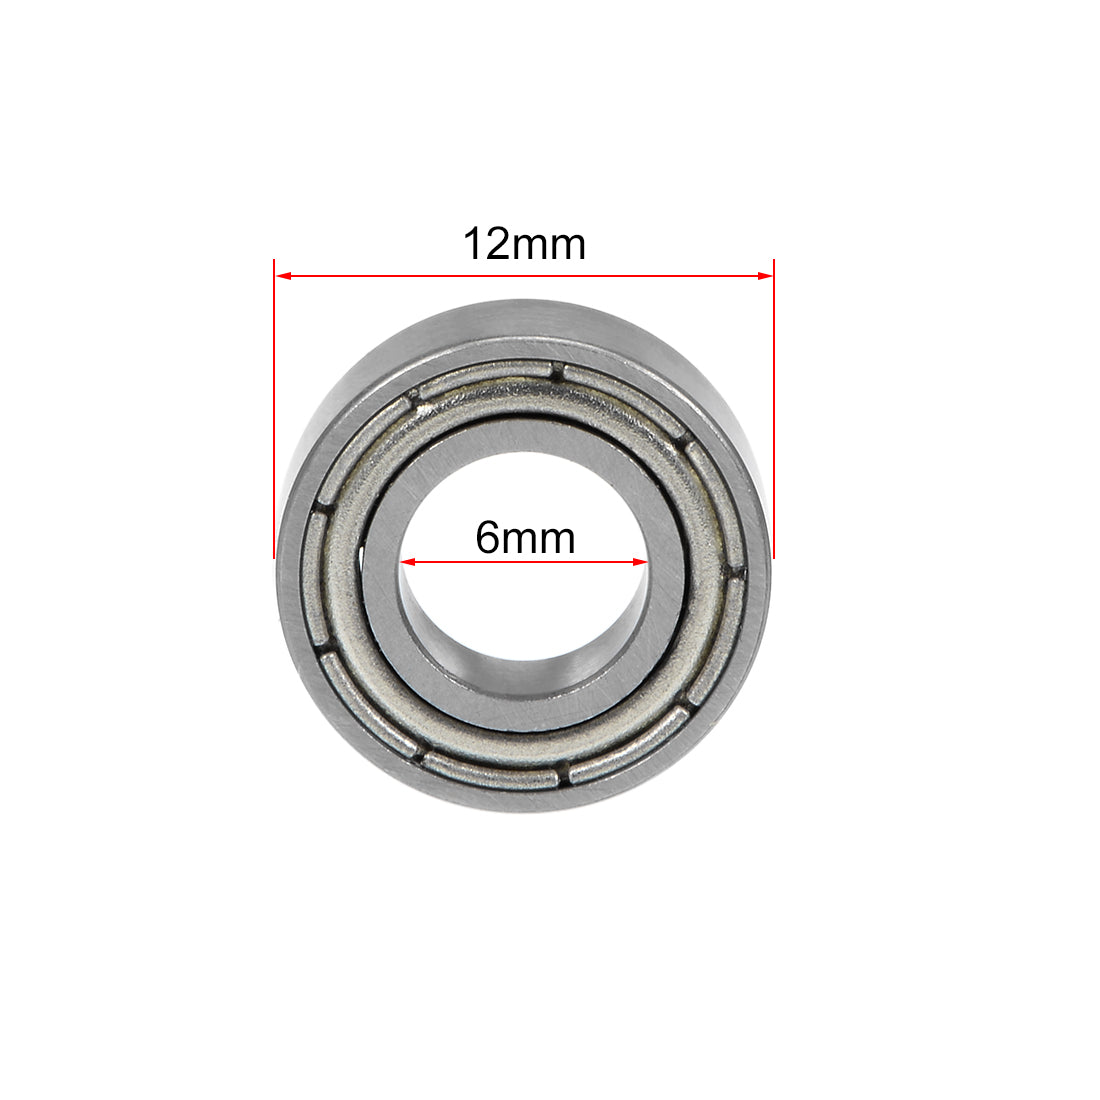 uxcell Uxcell Deep Groove Ball Bearing Metric Double Sealed Chrome Steel ABEC1 Z1